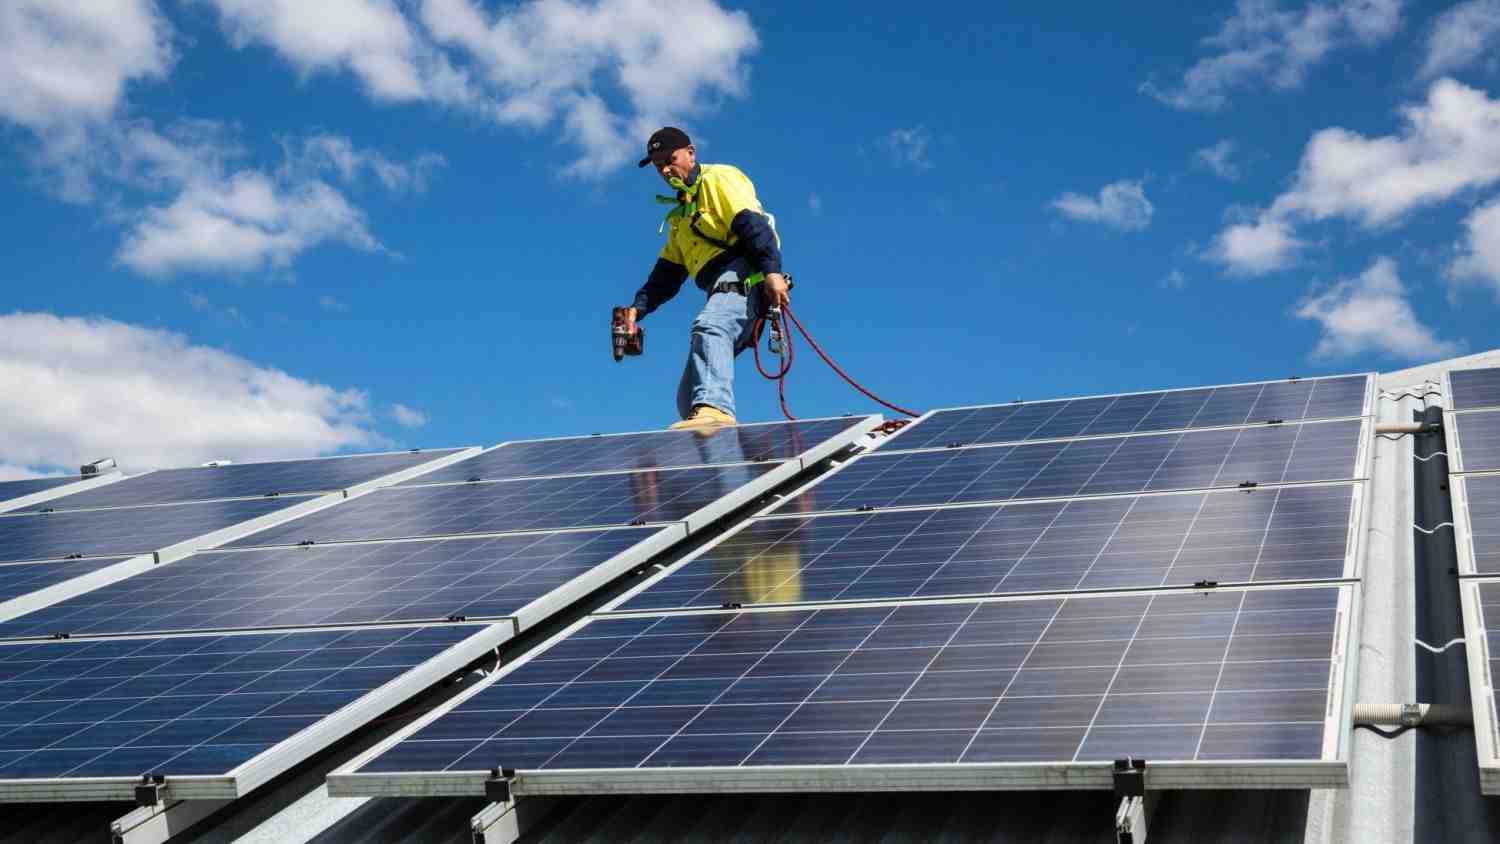 How Long Does It Take for a Solar Panel to Pay for Itself?